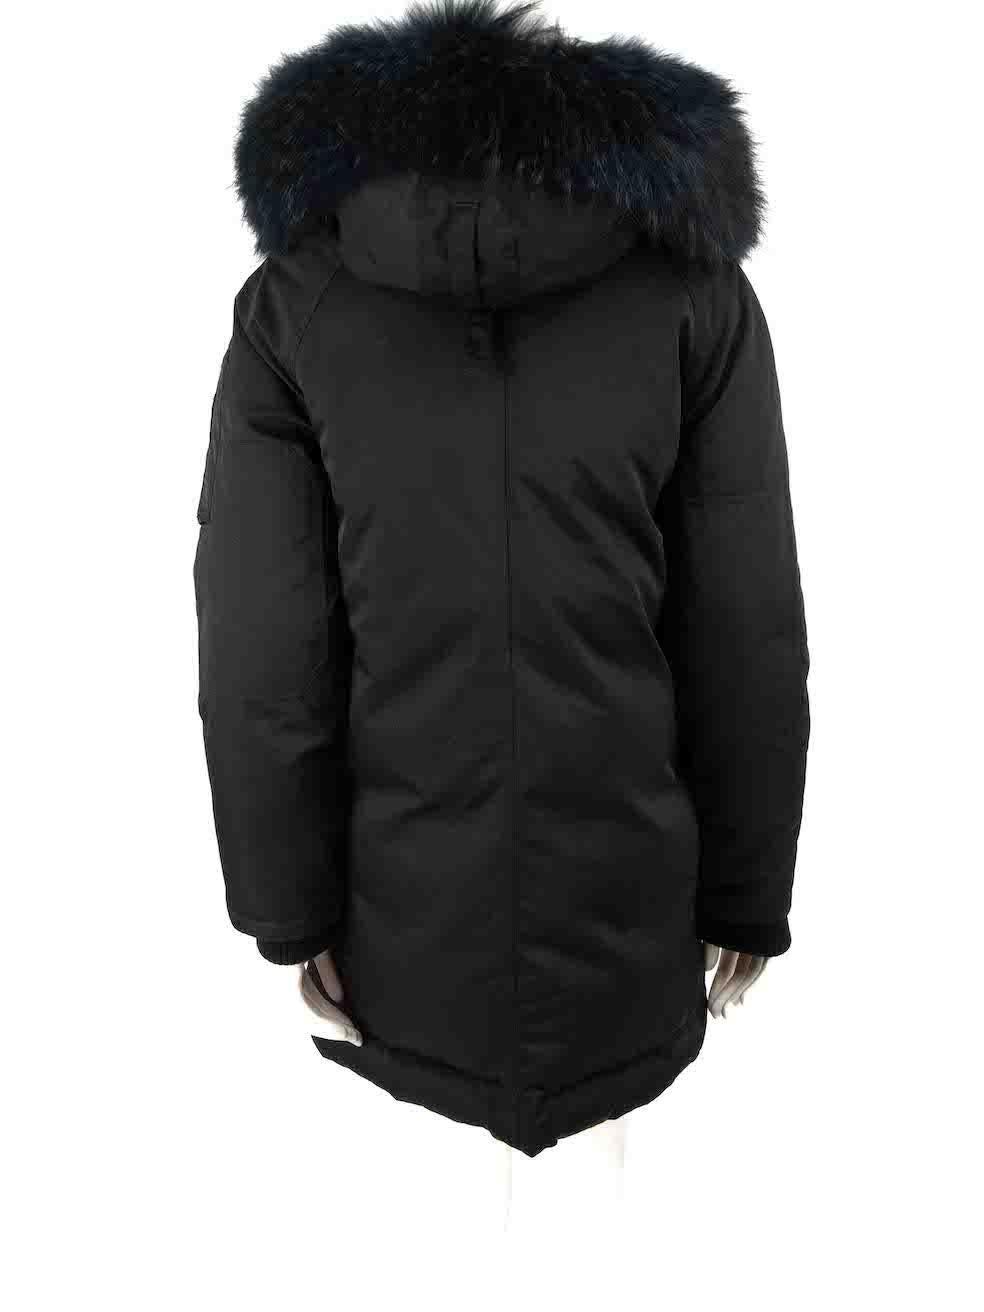 Kenzo Black Fur Trim Padded Coat Size S In Good Condition For Sale In London, GB